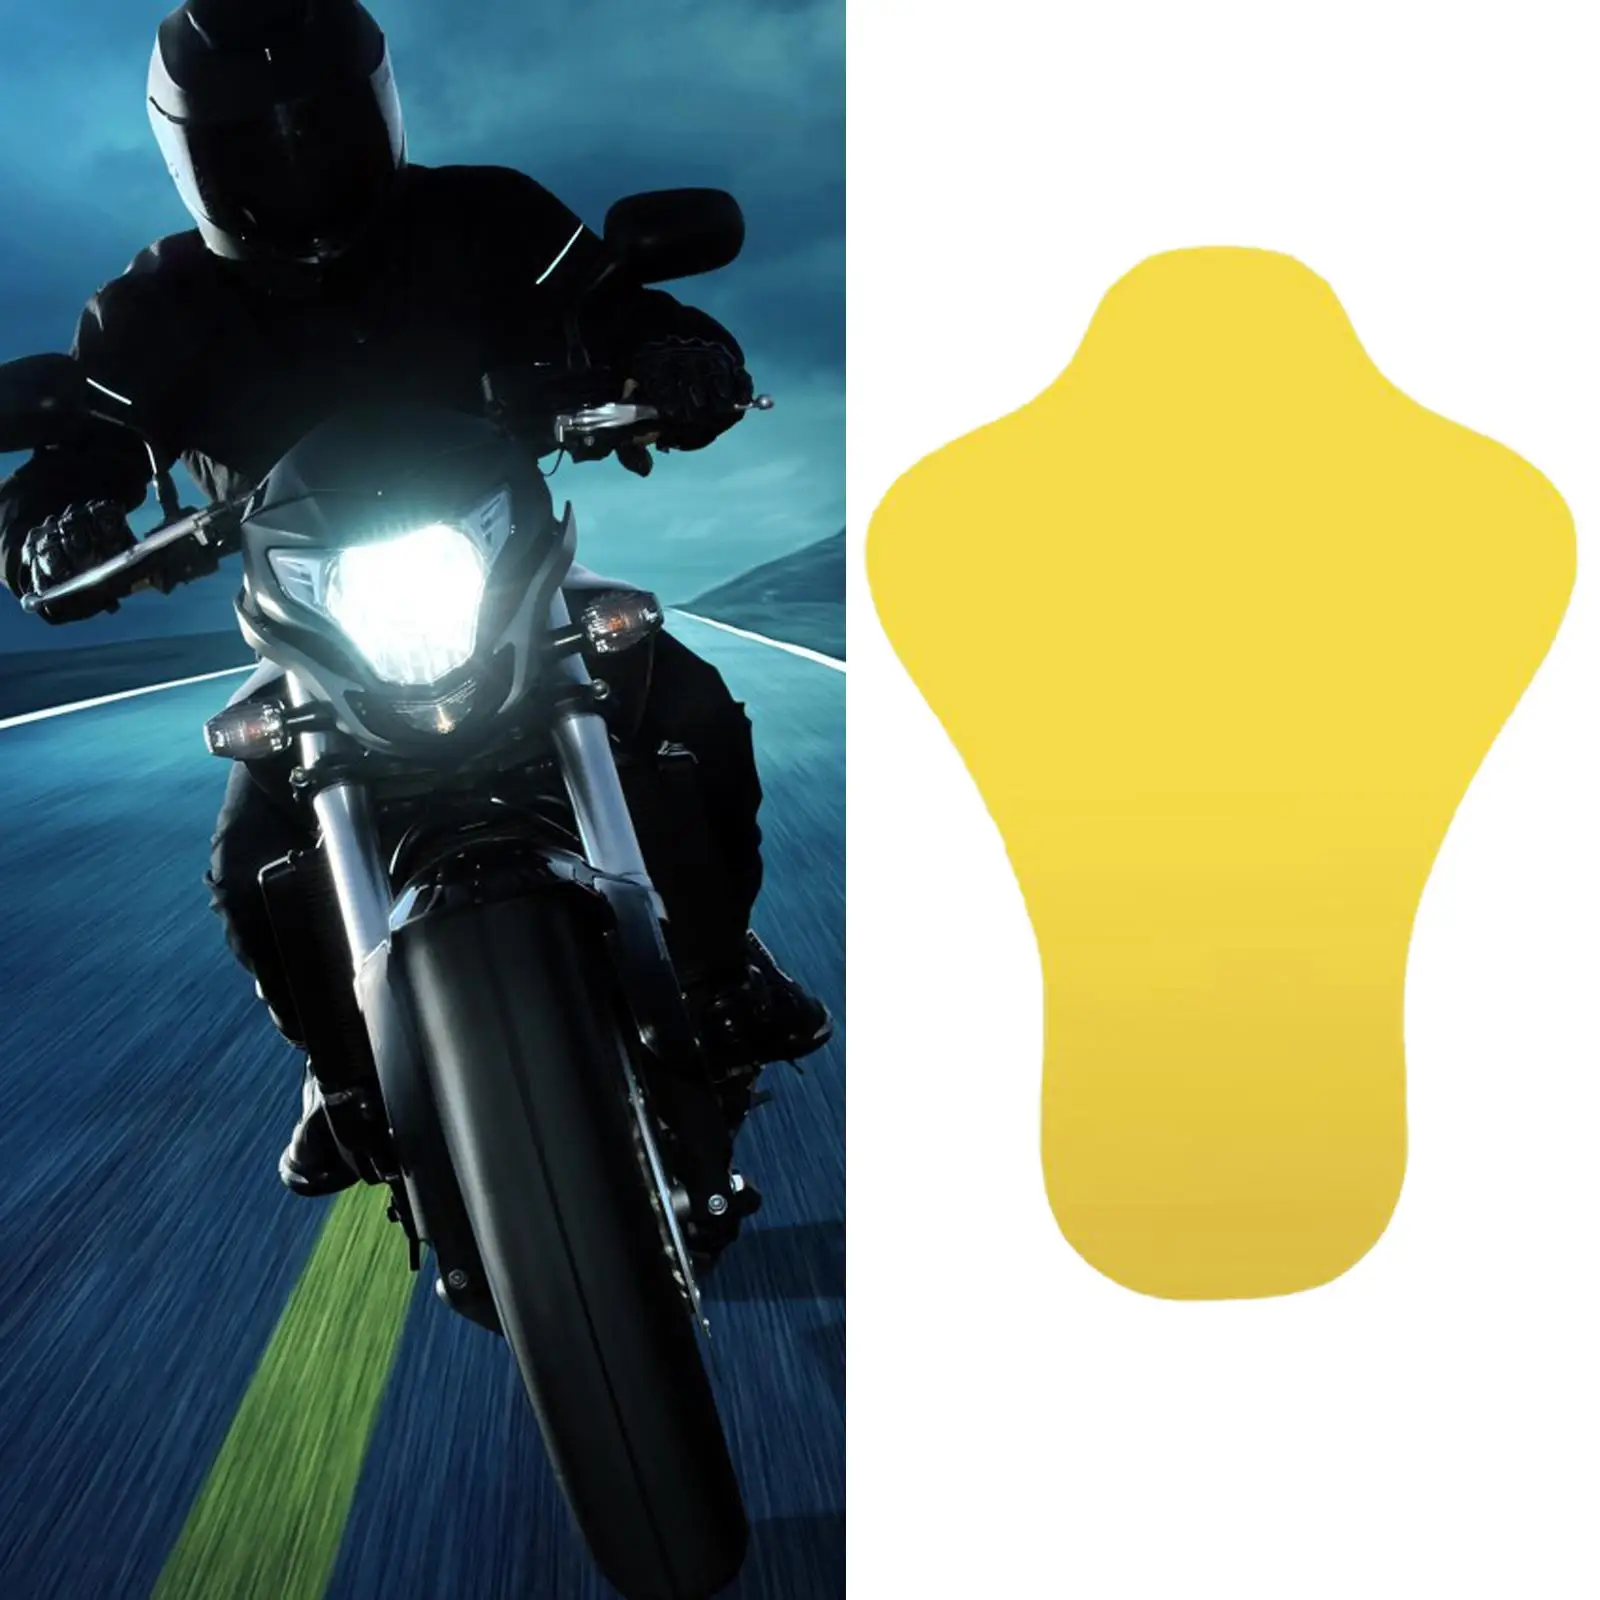 Motorcycle Back Guards Guard Removable Back Chest Protector Pads Motorcycle Accessories Protective Inside Gear for Sport Devices